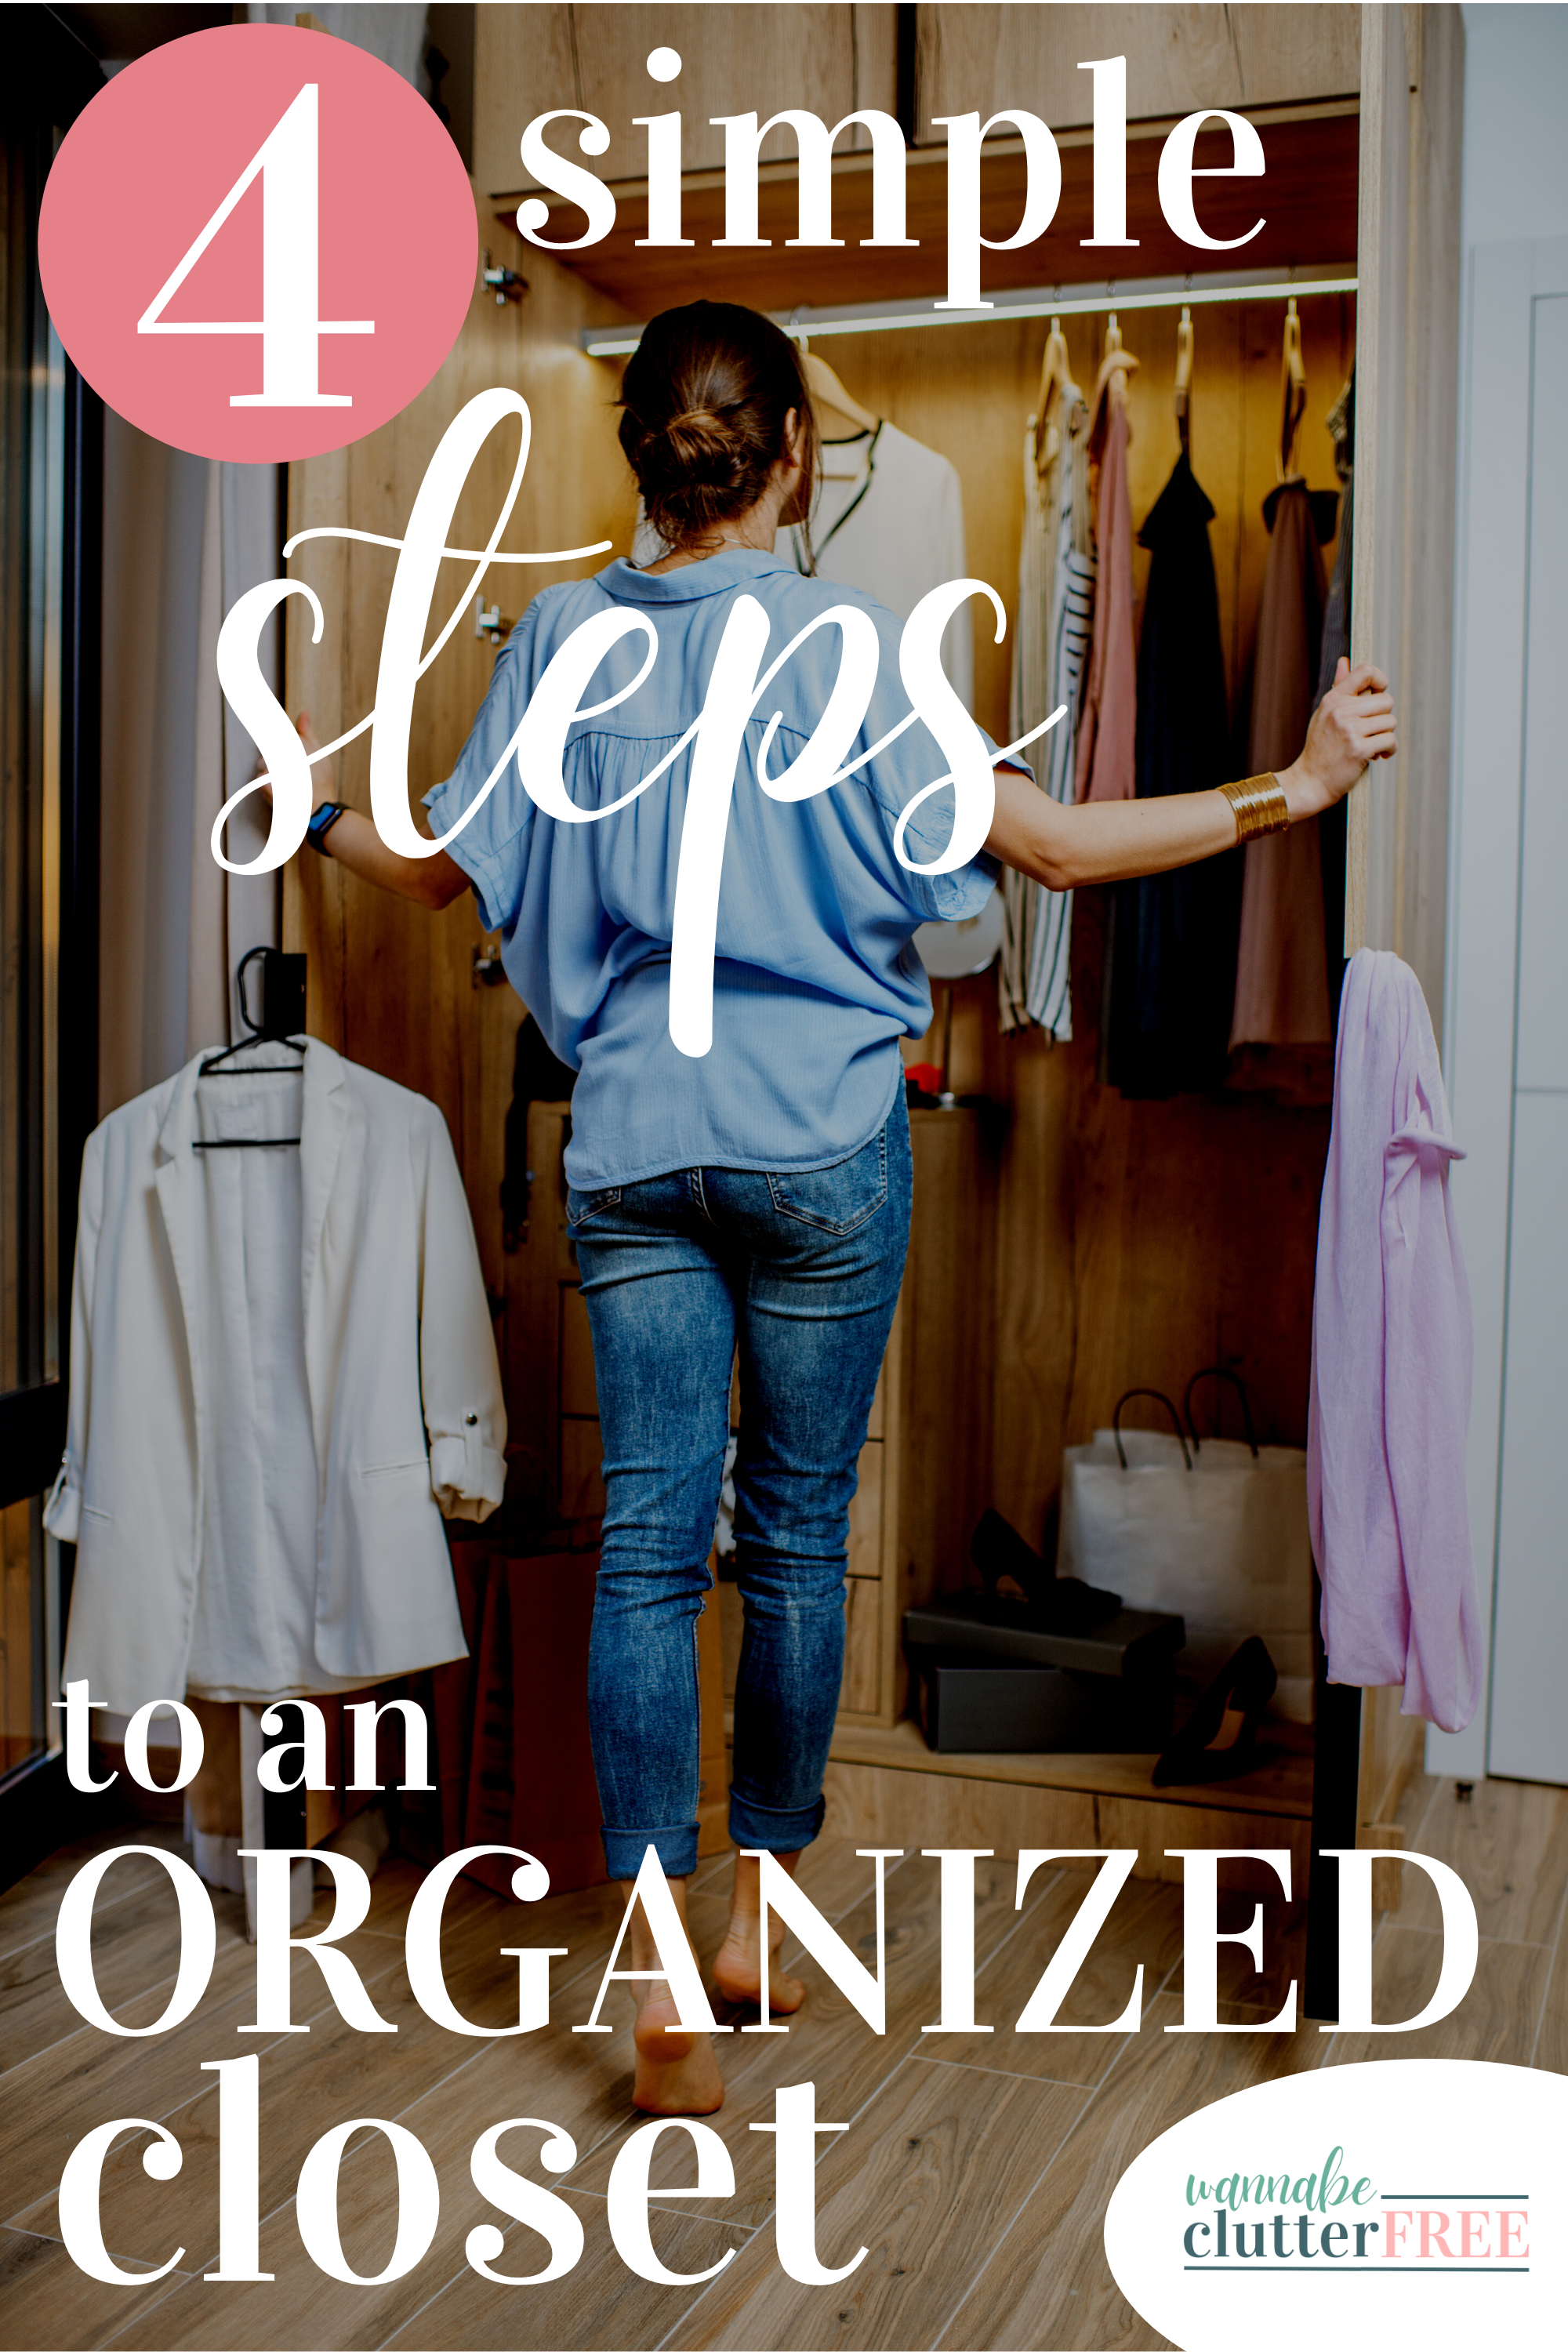 4 Simple Steps to an Organized Closet